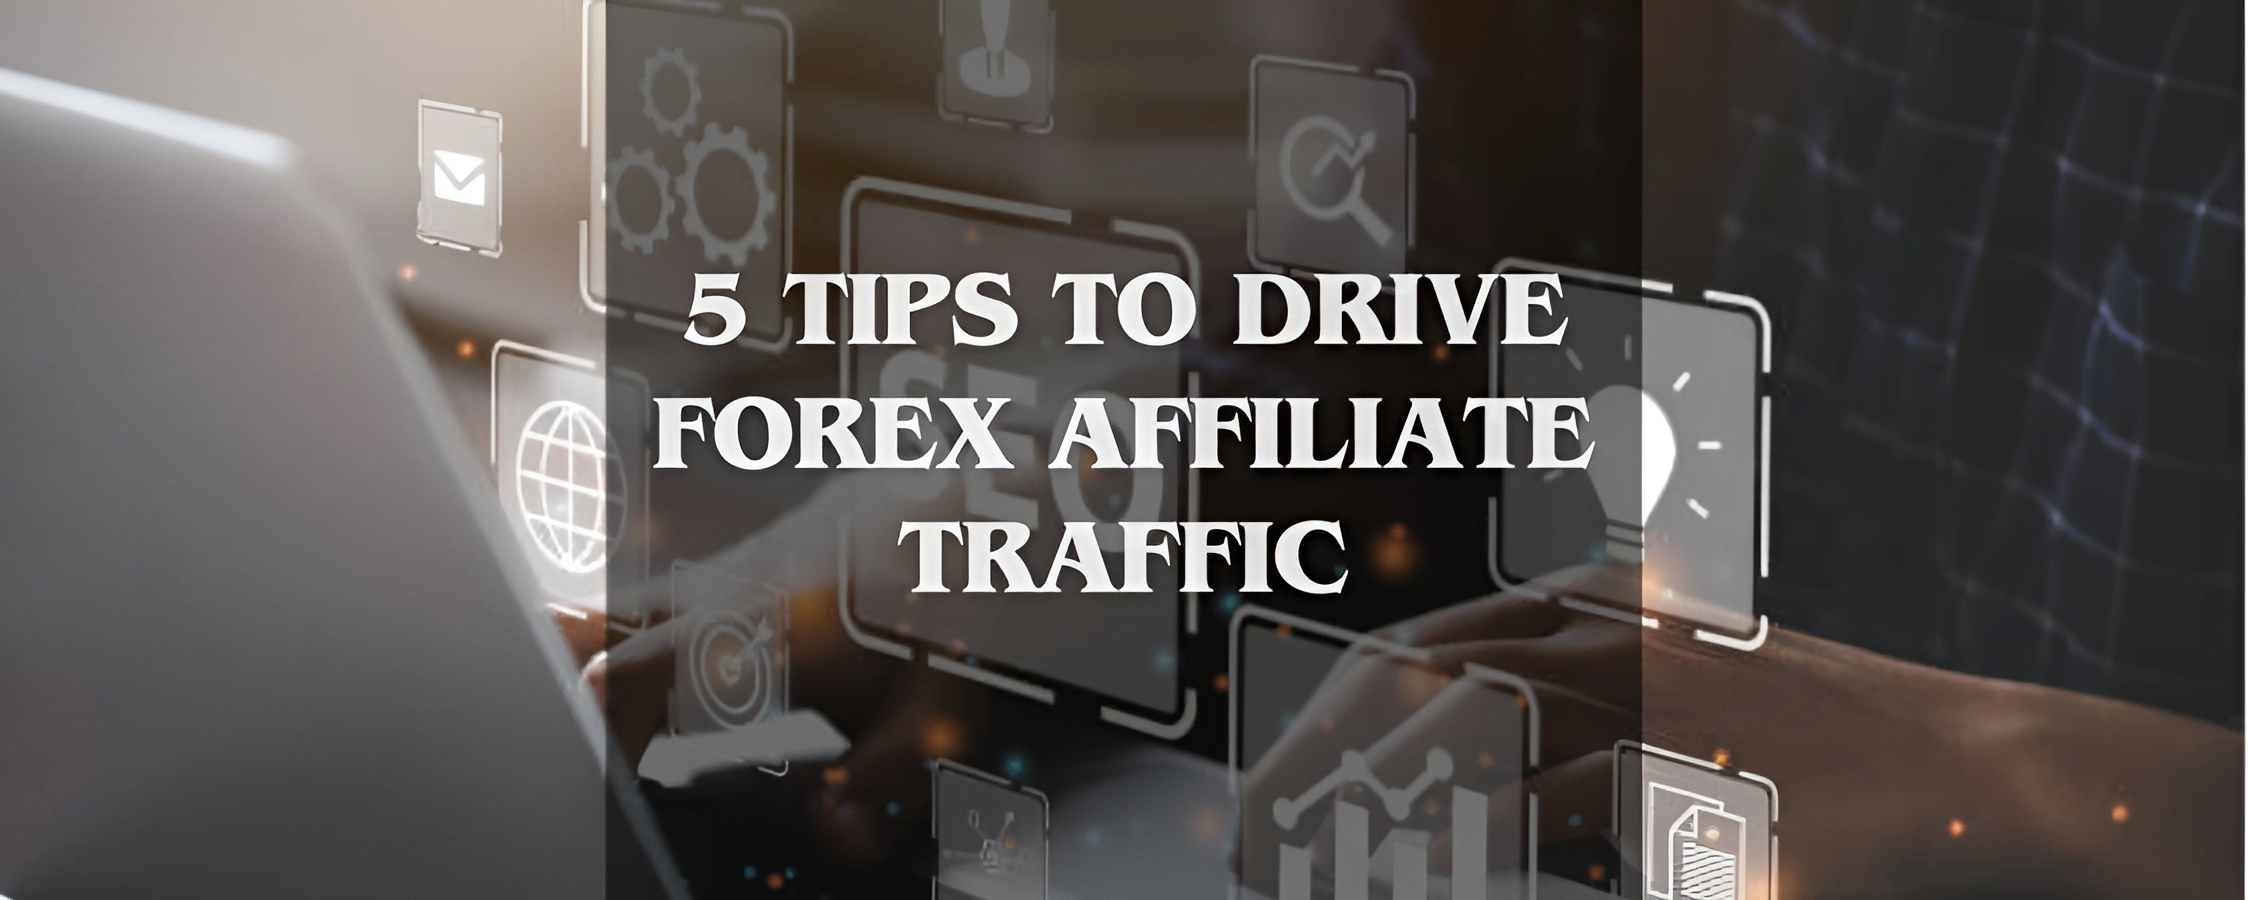 5 Tips to Drive Forex Affiliate Traffic and Increase Your Commissions